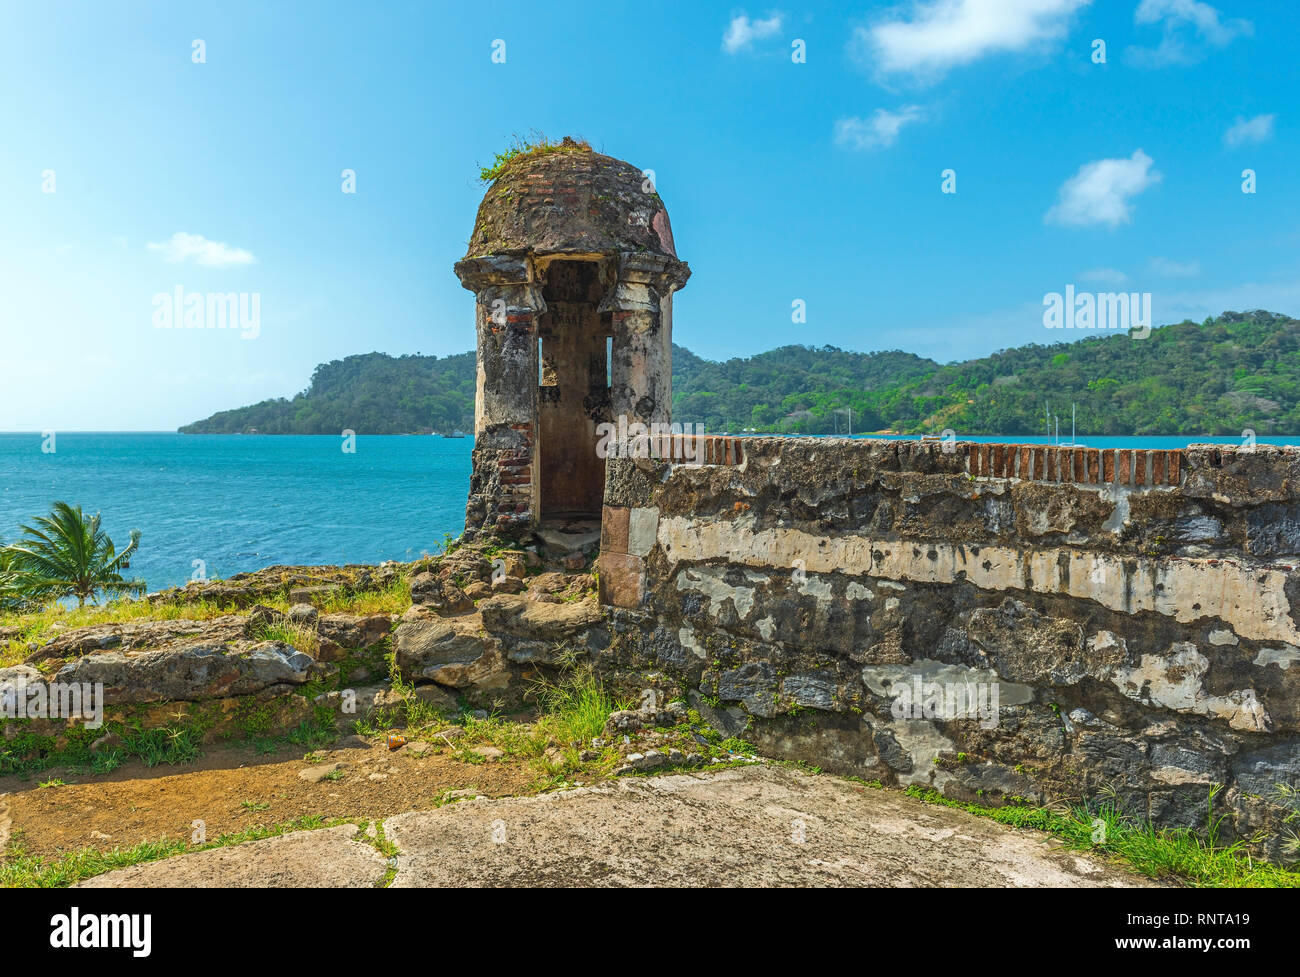 The Spanish fortress of Santiago built to protect the harbor of Portobelo against pirate incursions, city of Portobelo by the Caribbea Sea, Panama. Stock Photo